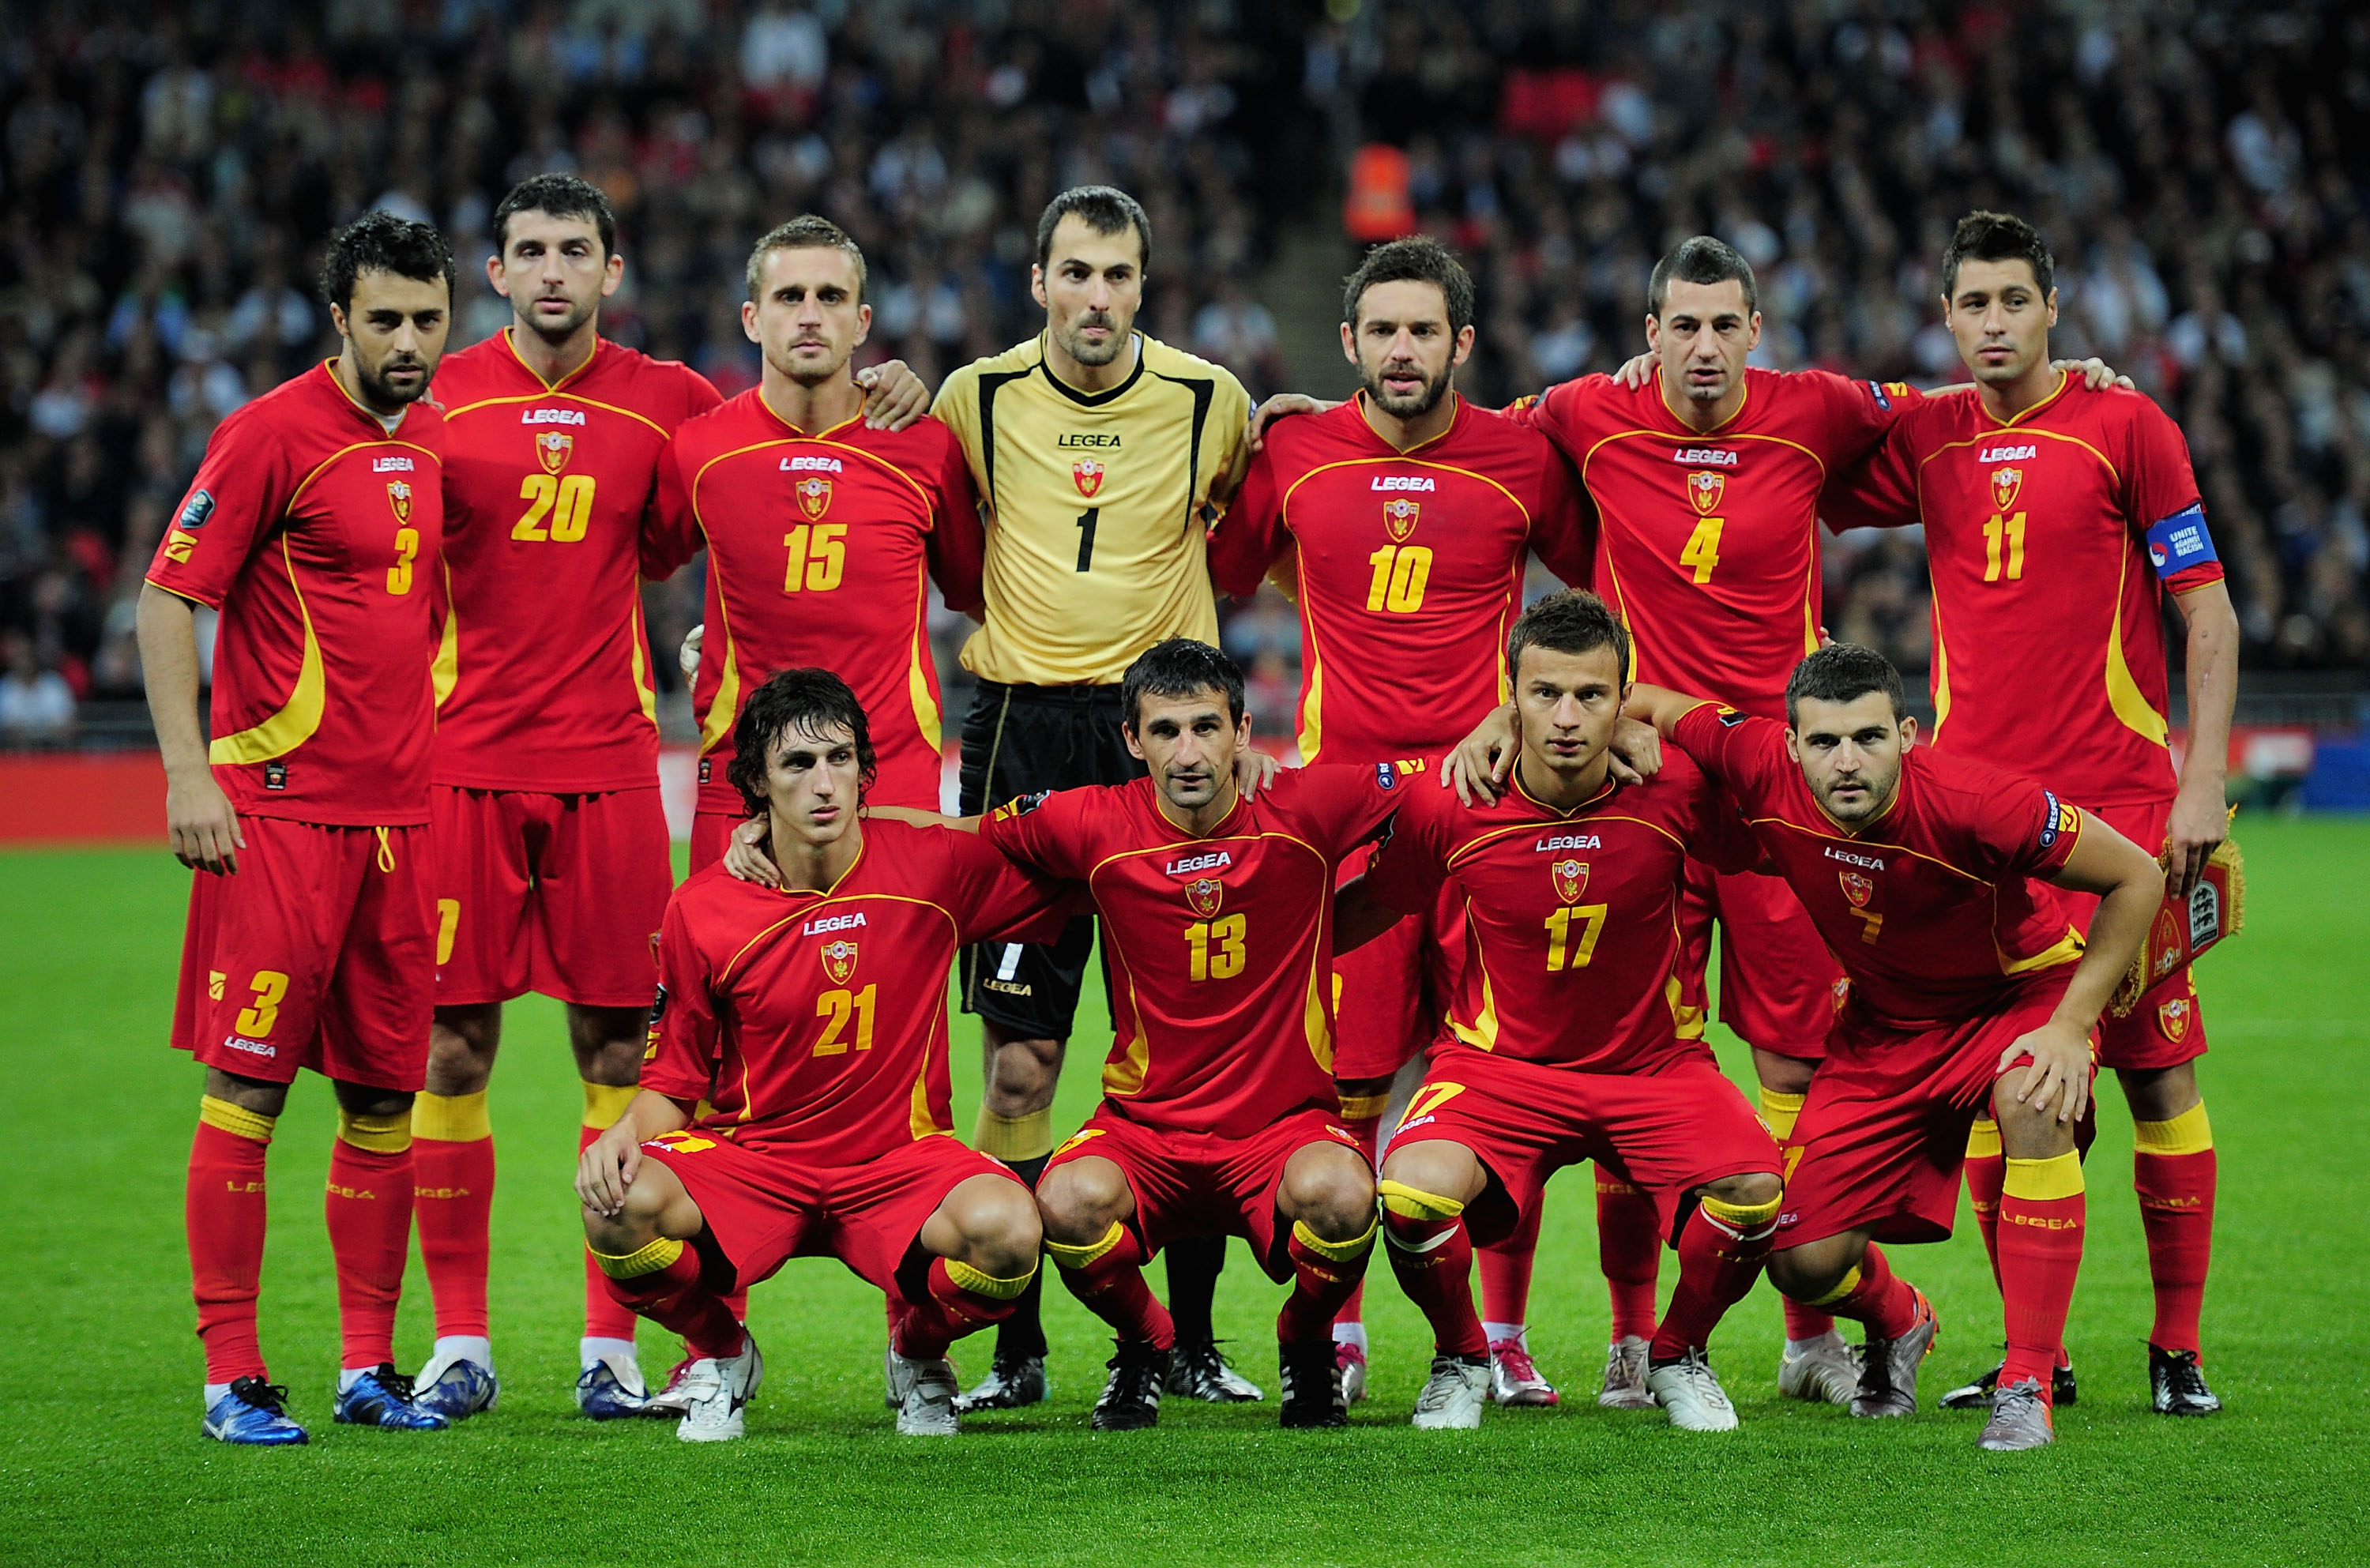 LONDON, ENGLAND - OCTOBER 12:  The Montenegro team line up during the UEFA EURO 2012 Group G Qualifying match between England and Montenegro at Wembley Stadium on October 12, 2010 in London, England.  (Photo by Shaun Botterill/Getty Images)